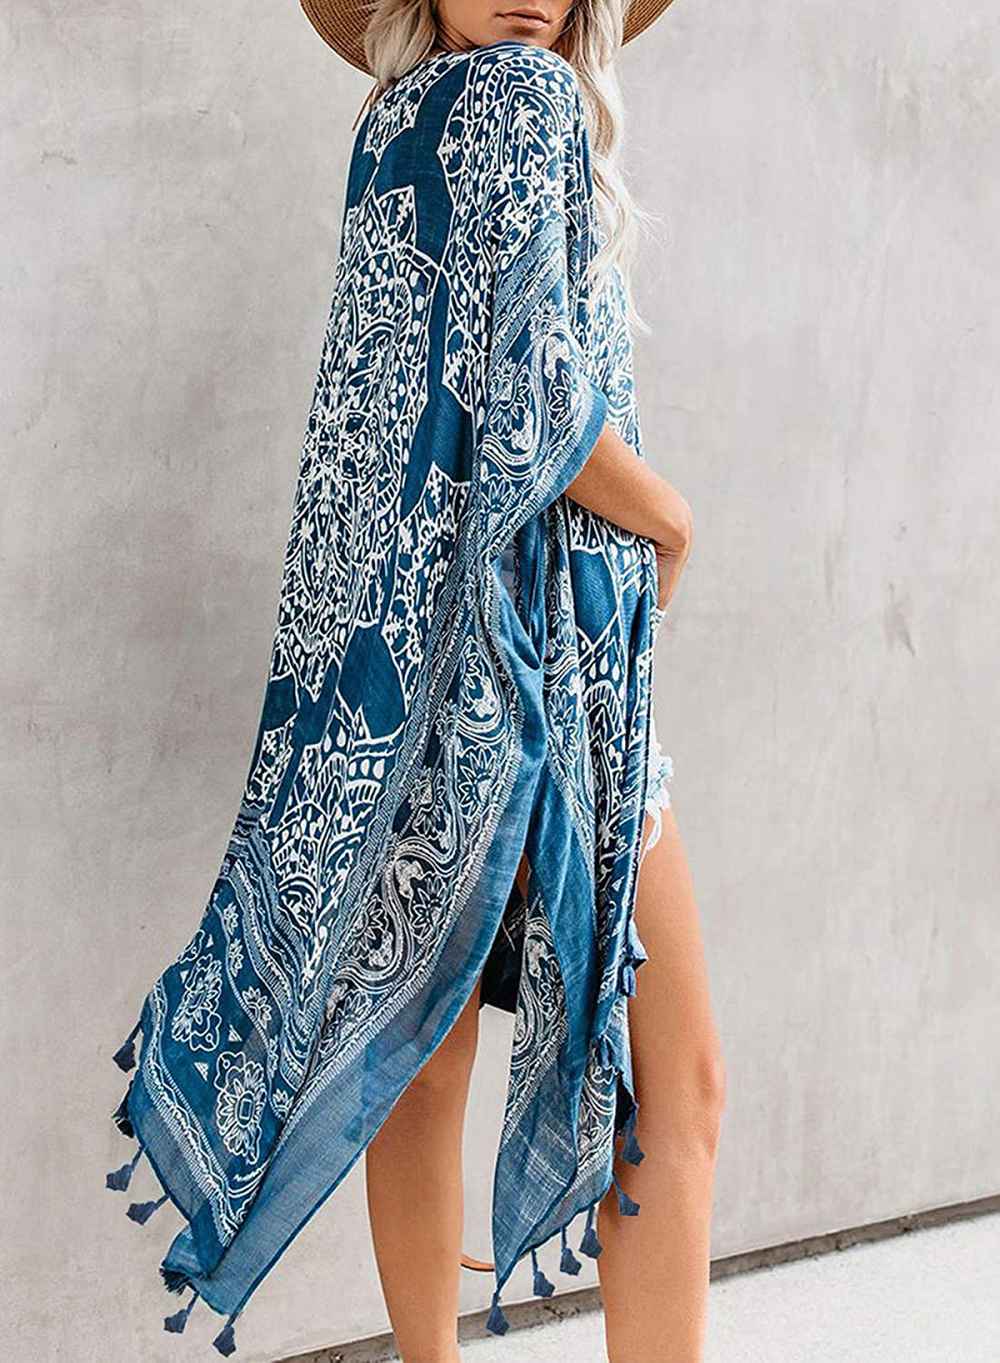 GOSOPIN Kimono Cover-Up Is a Total Compliment Magnet